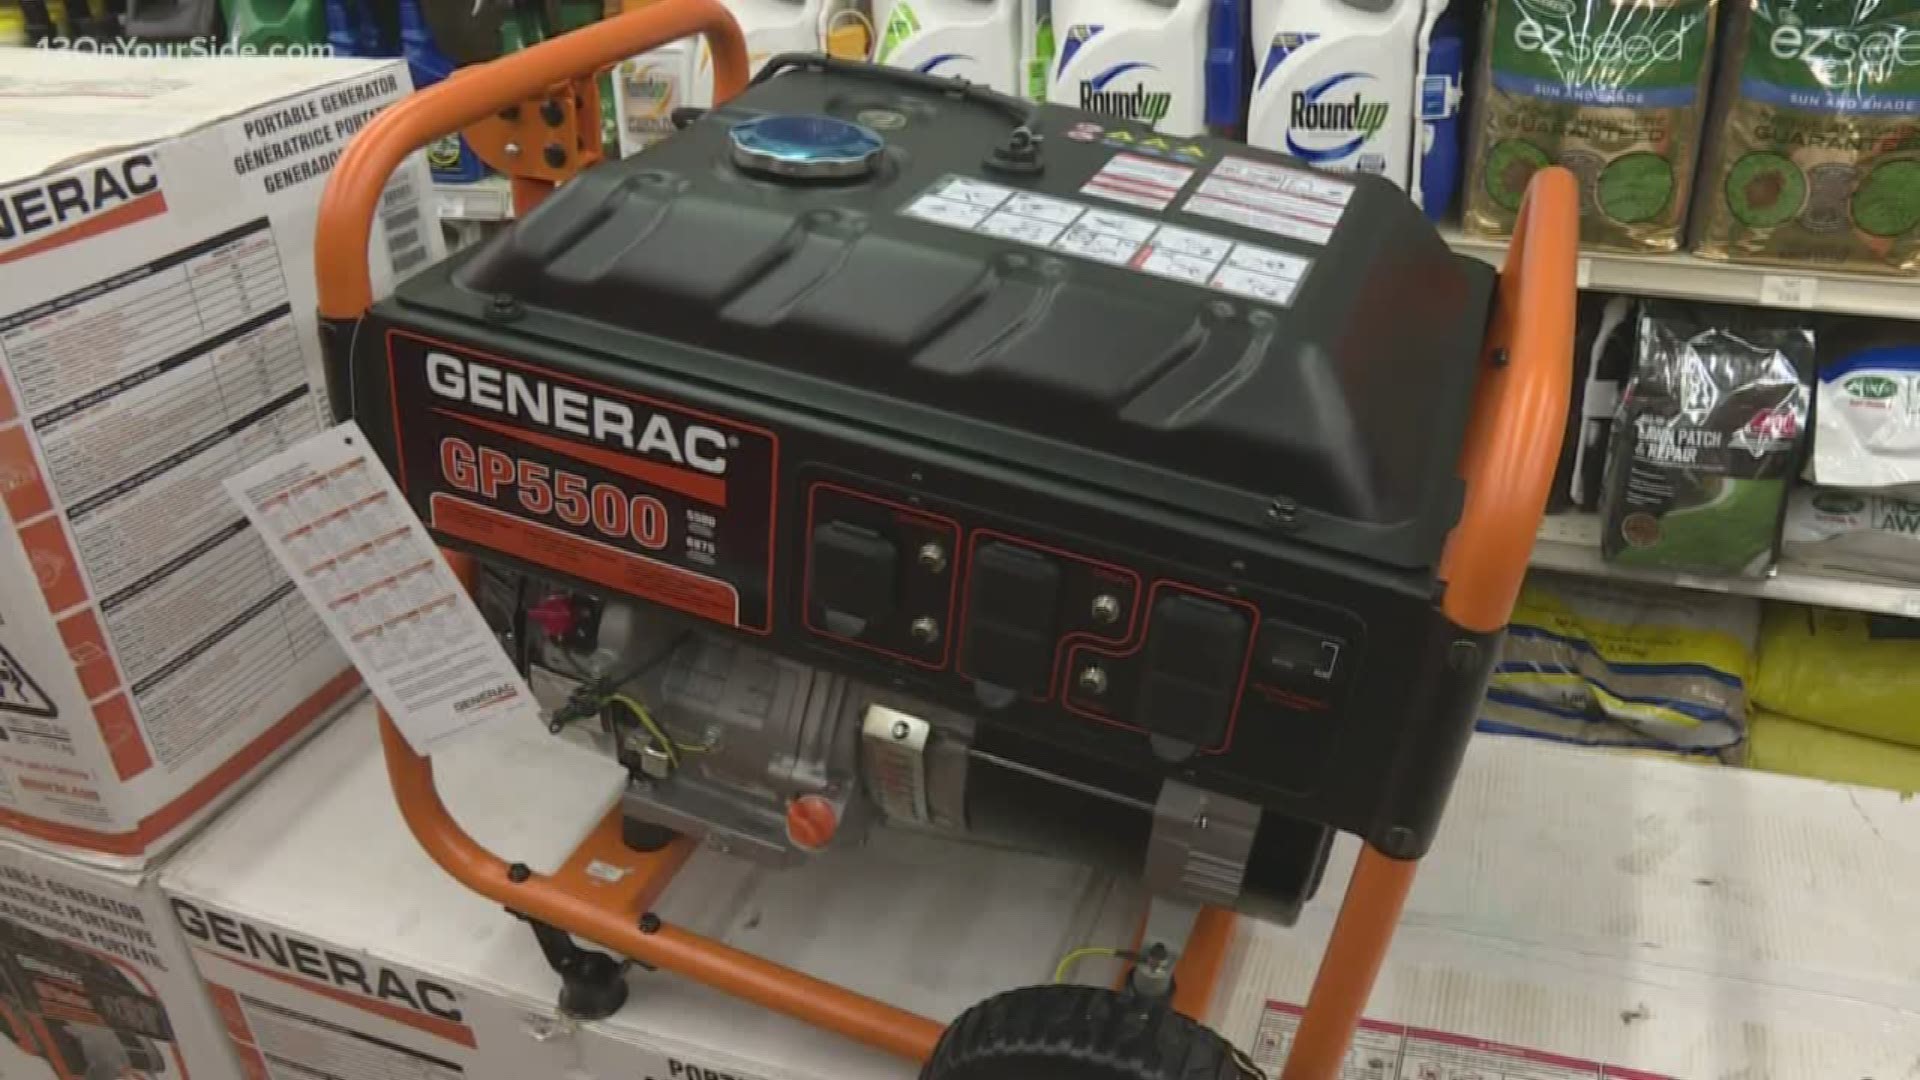 A store manager of Ace Hardware advises buying the right size generator for your home.